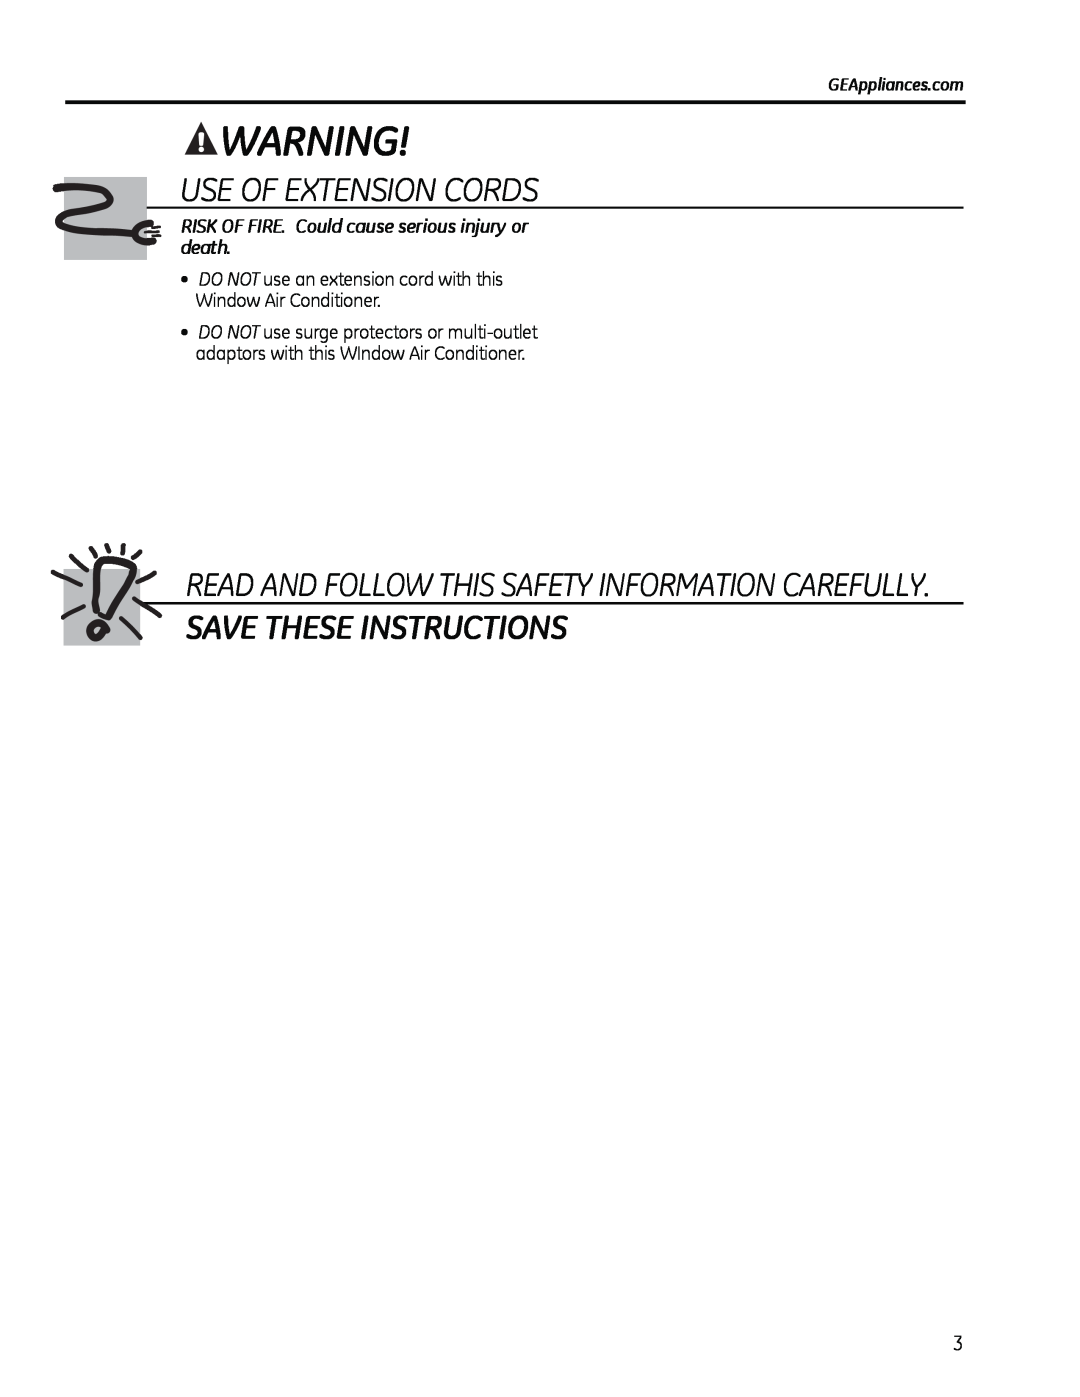 GE AHM18 Use Of Extension Cords, Save These Instructions, RISK OF FIRE. Could cause serious injury or death 